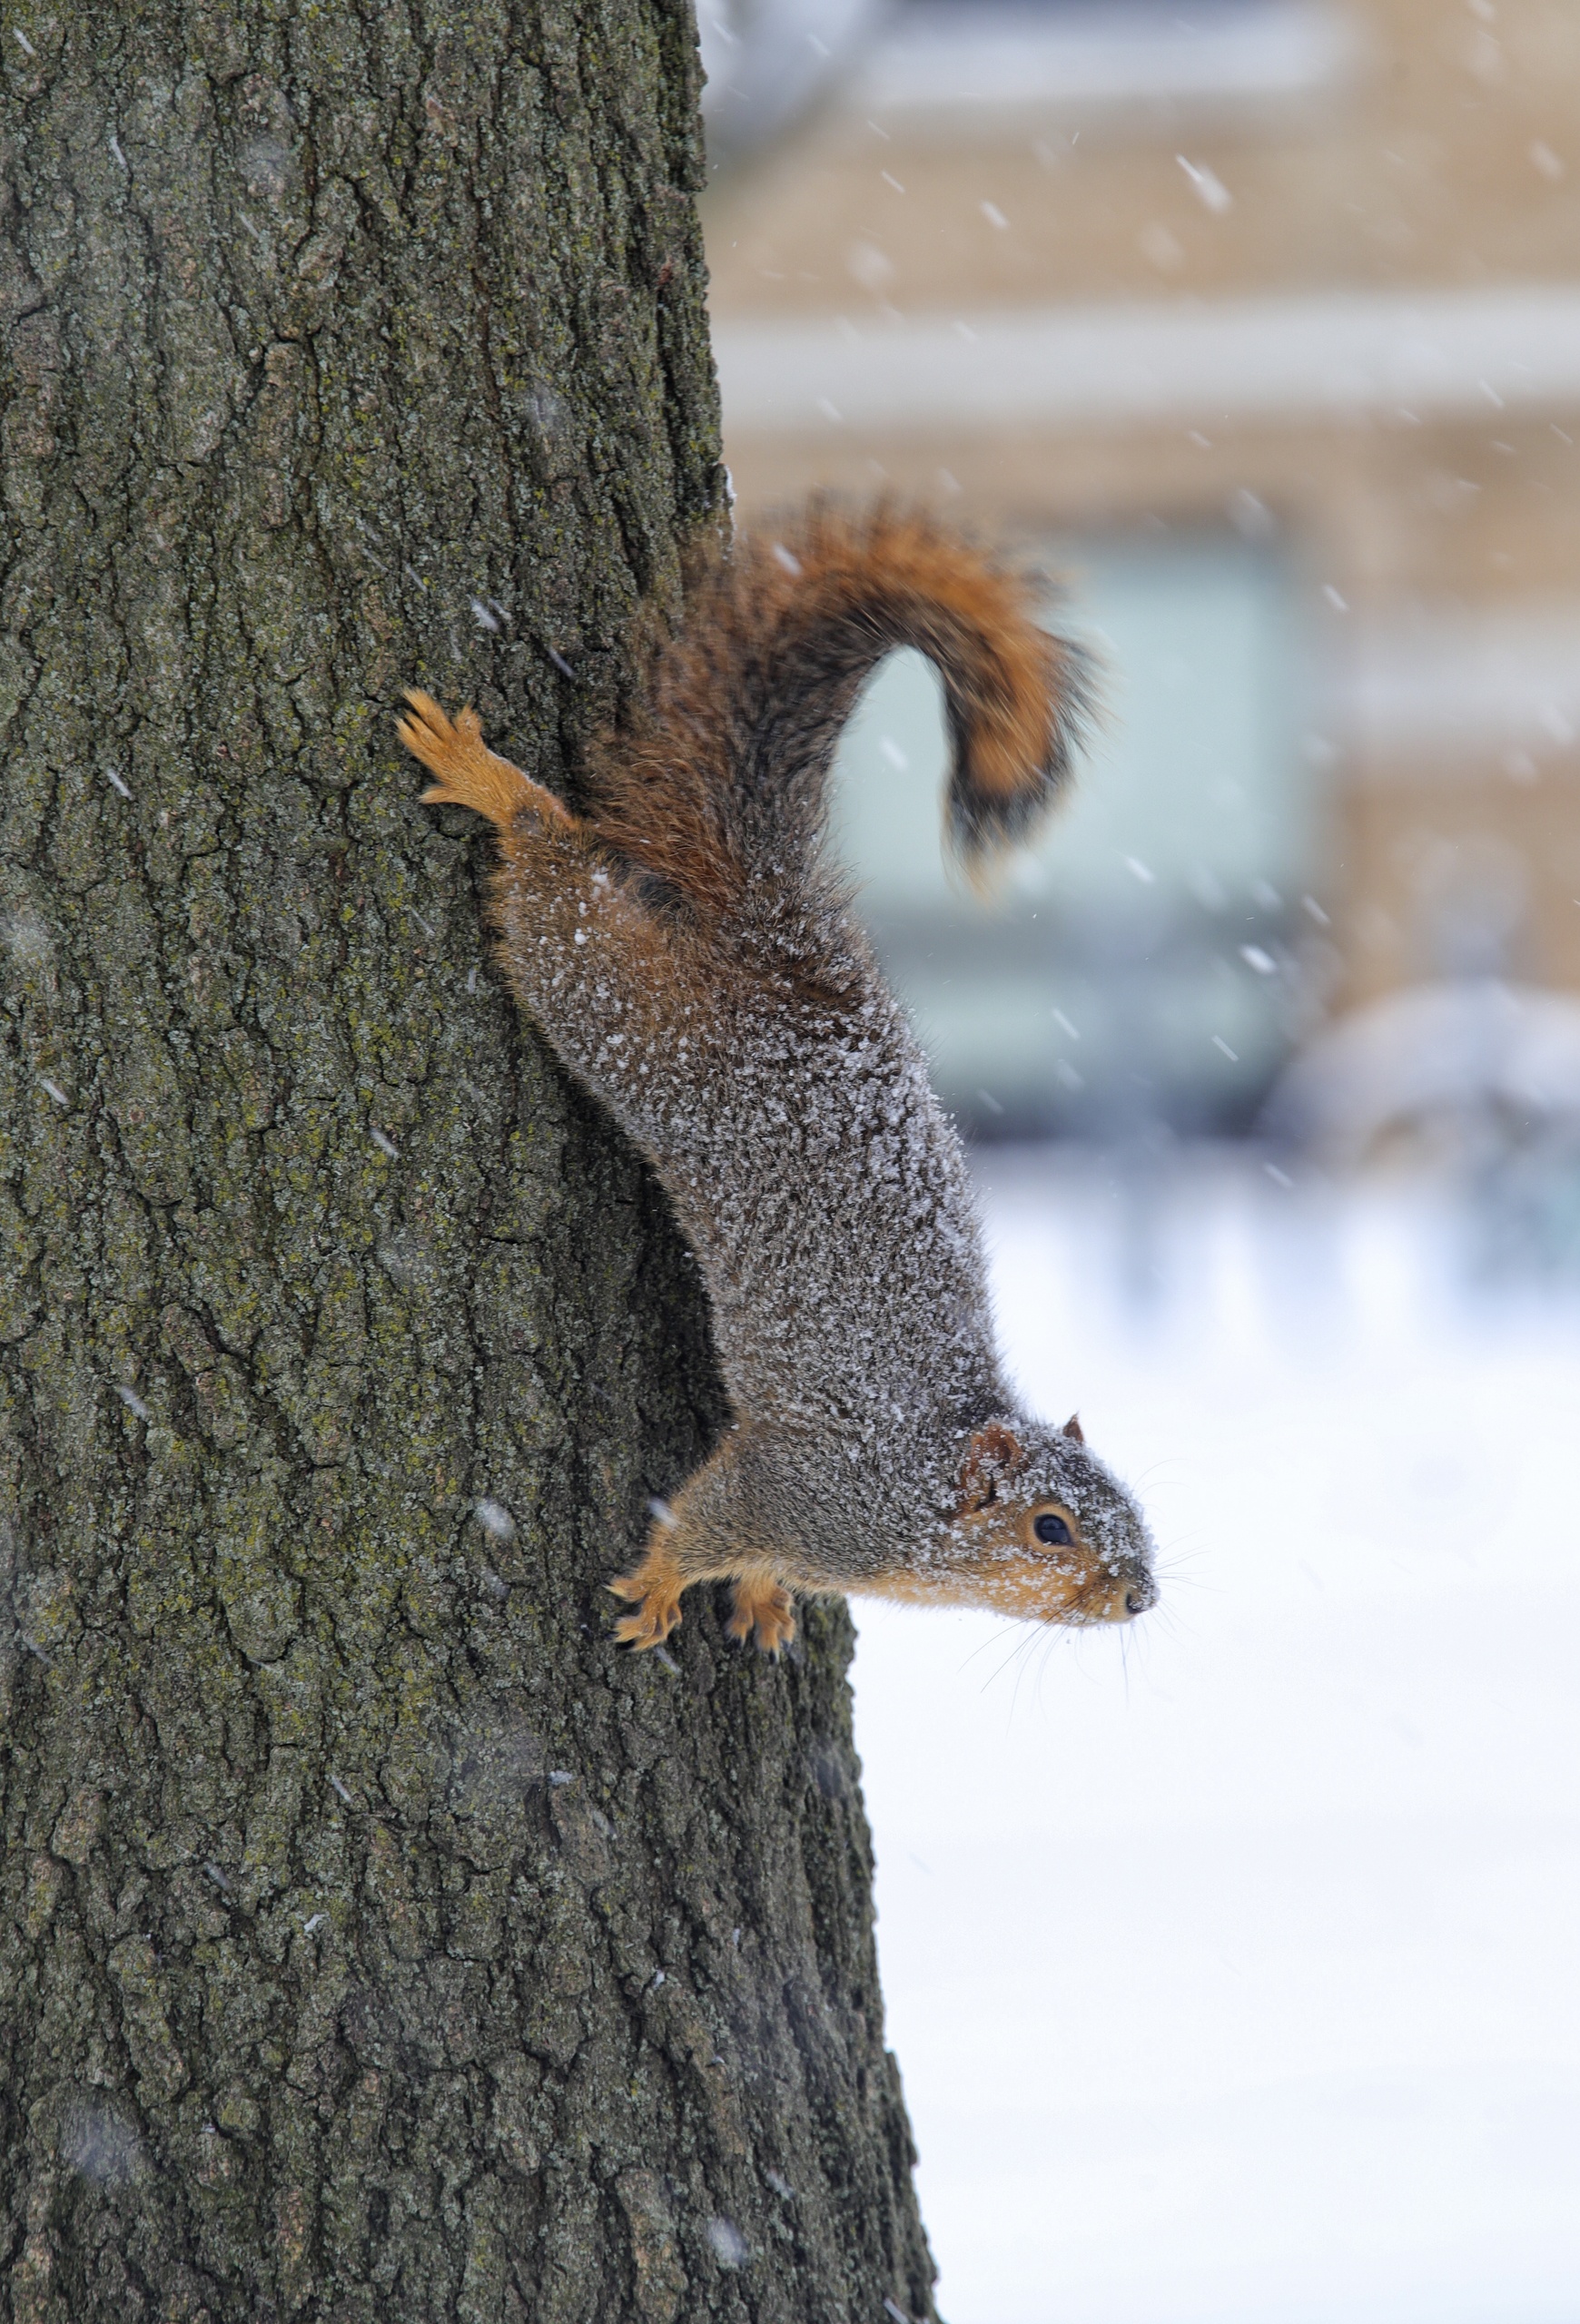 Even the squirrels were covered in snow climbing down a tree. 